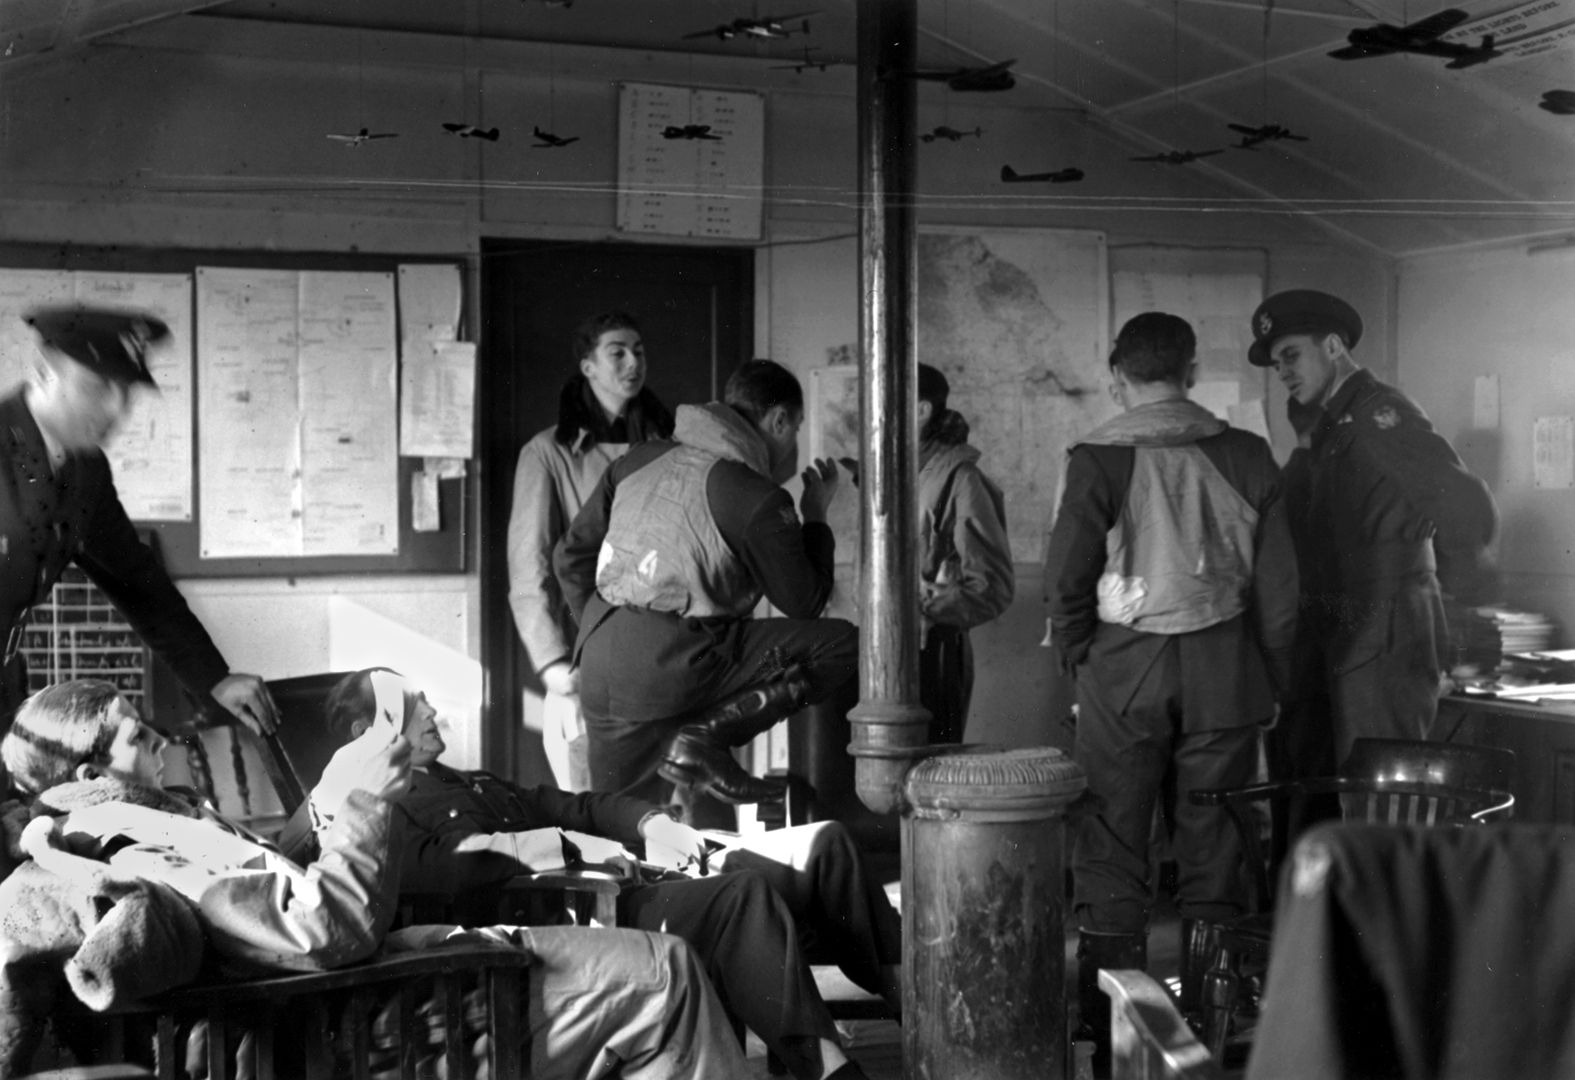 Eagle Squadron pilots relax in the dispersal hut while waiting to make training flights.